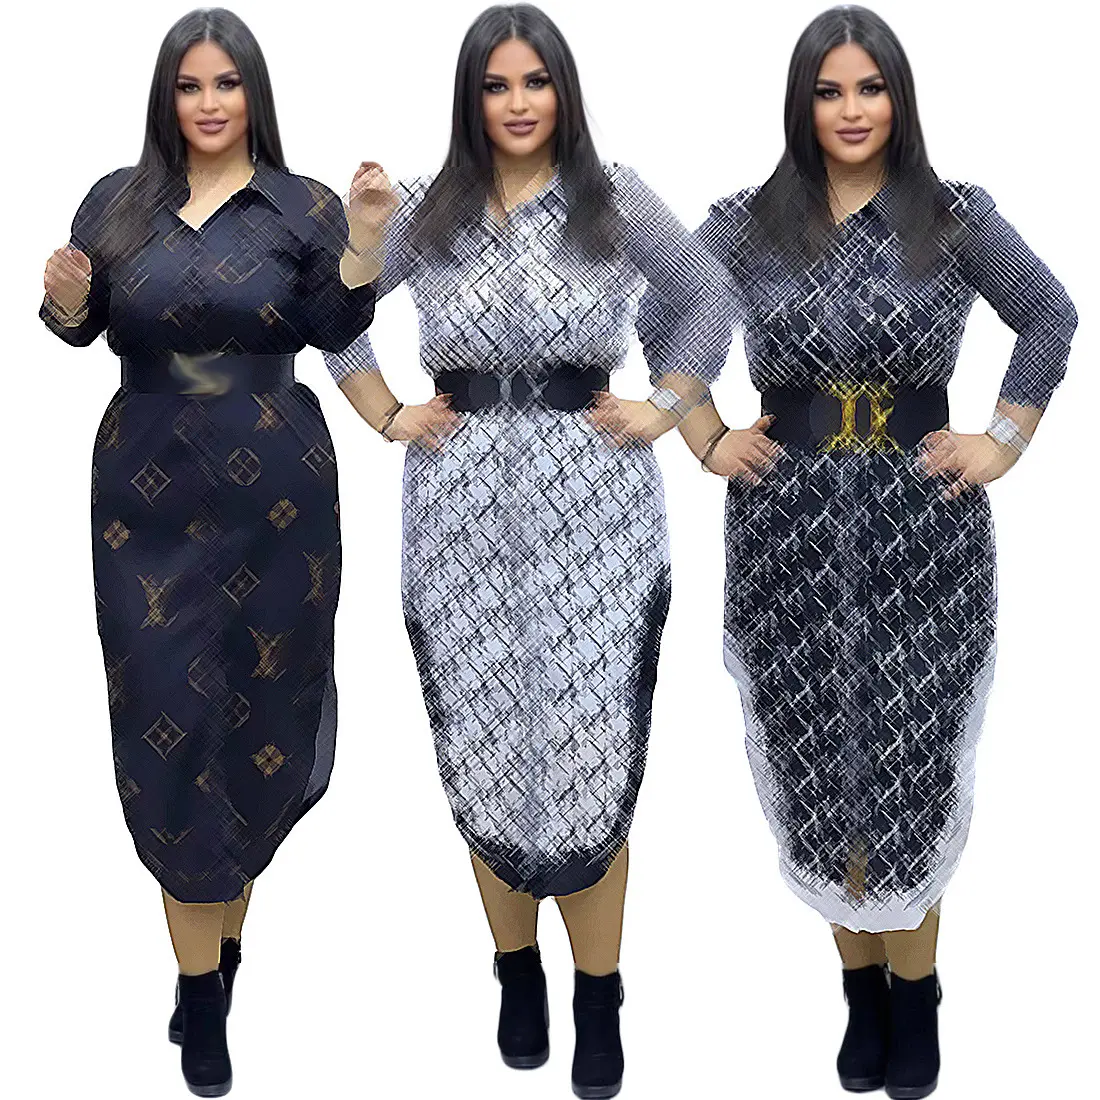 Hot selling Casual Loose Long Sleeve Dress sexy dress bodycon 2022 Brand women's clothing